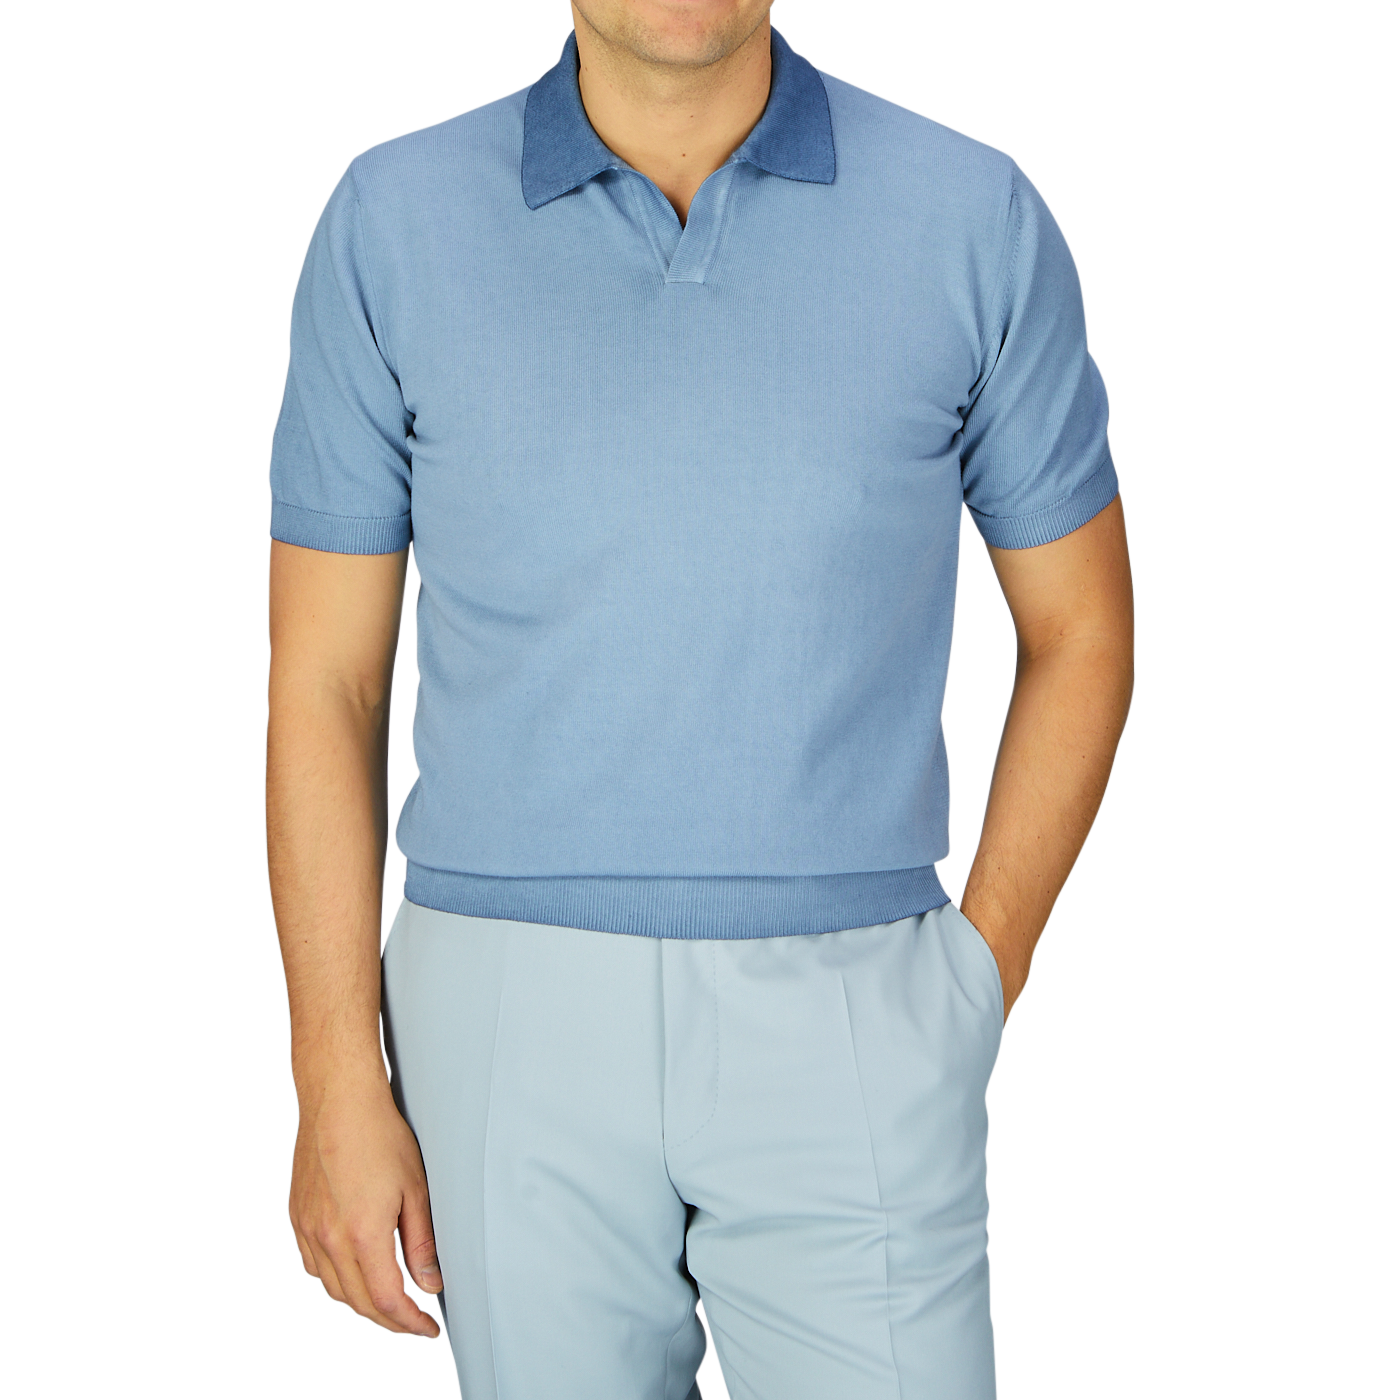 Man wearing a seasonal Light Blue Dyed Cotton Capri Collar Polo Shirt and matching trousers against a plain background, with the garment-dyed shirt made in Italy by Altea.